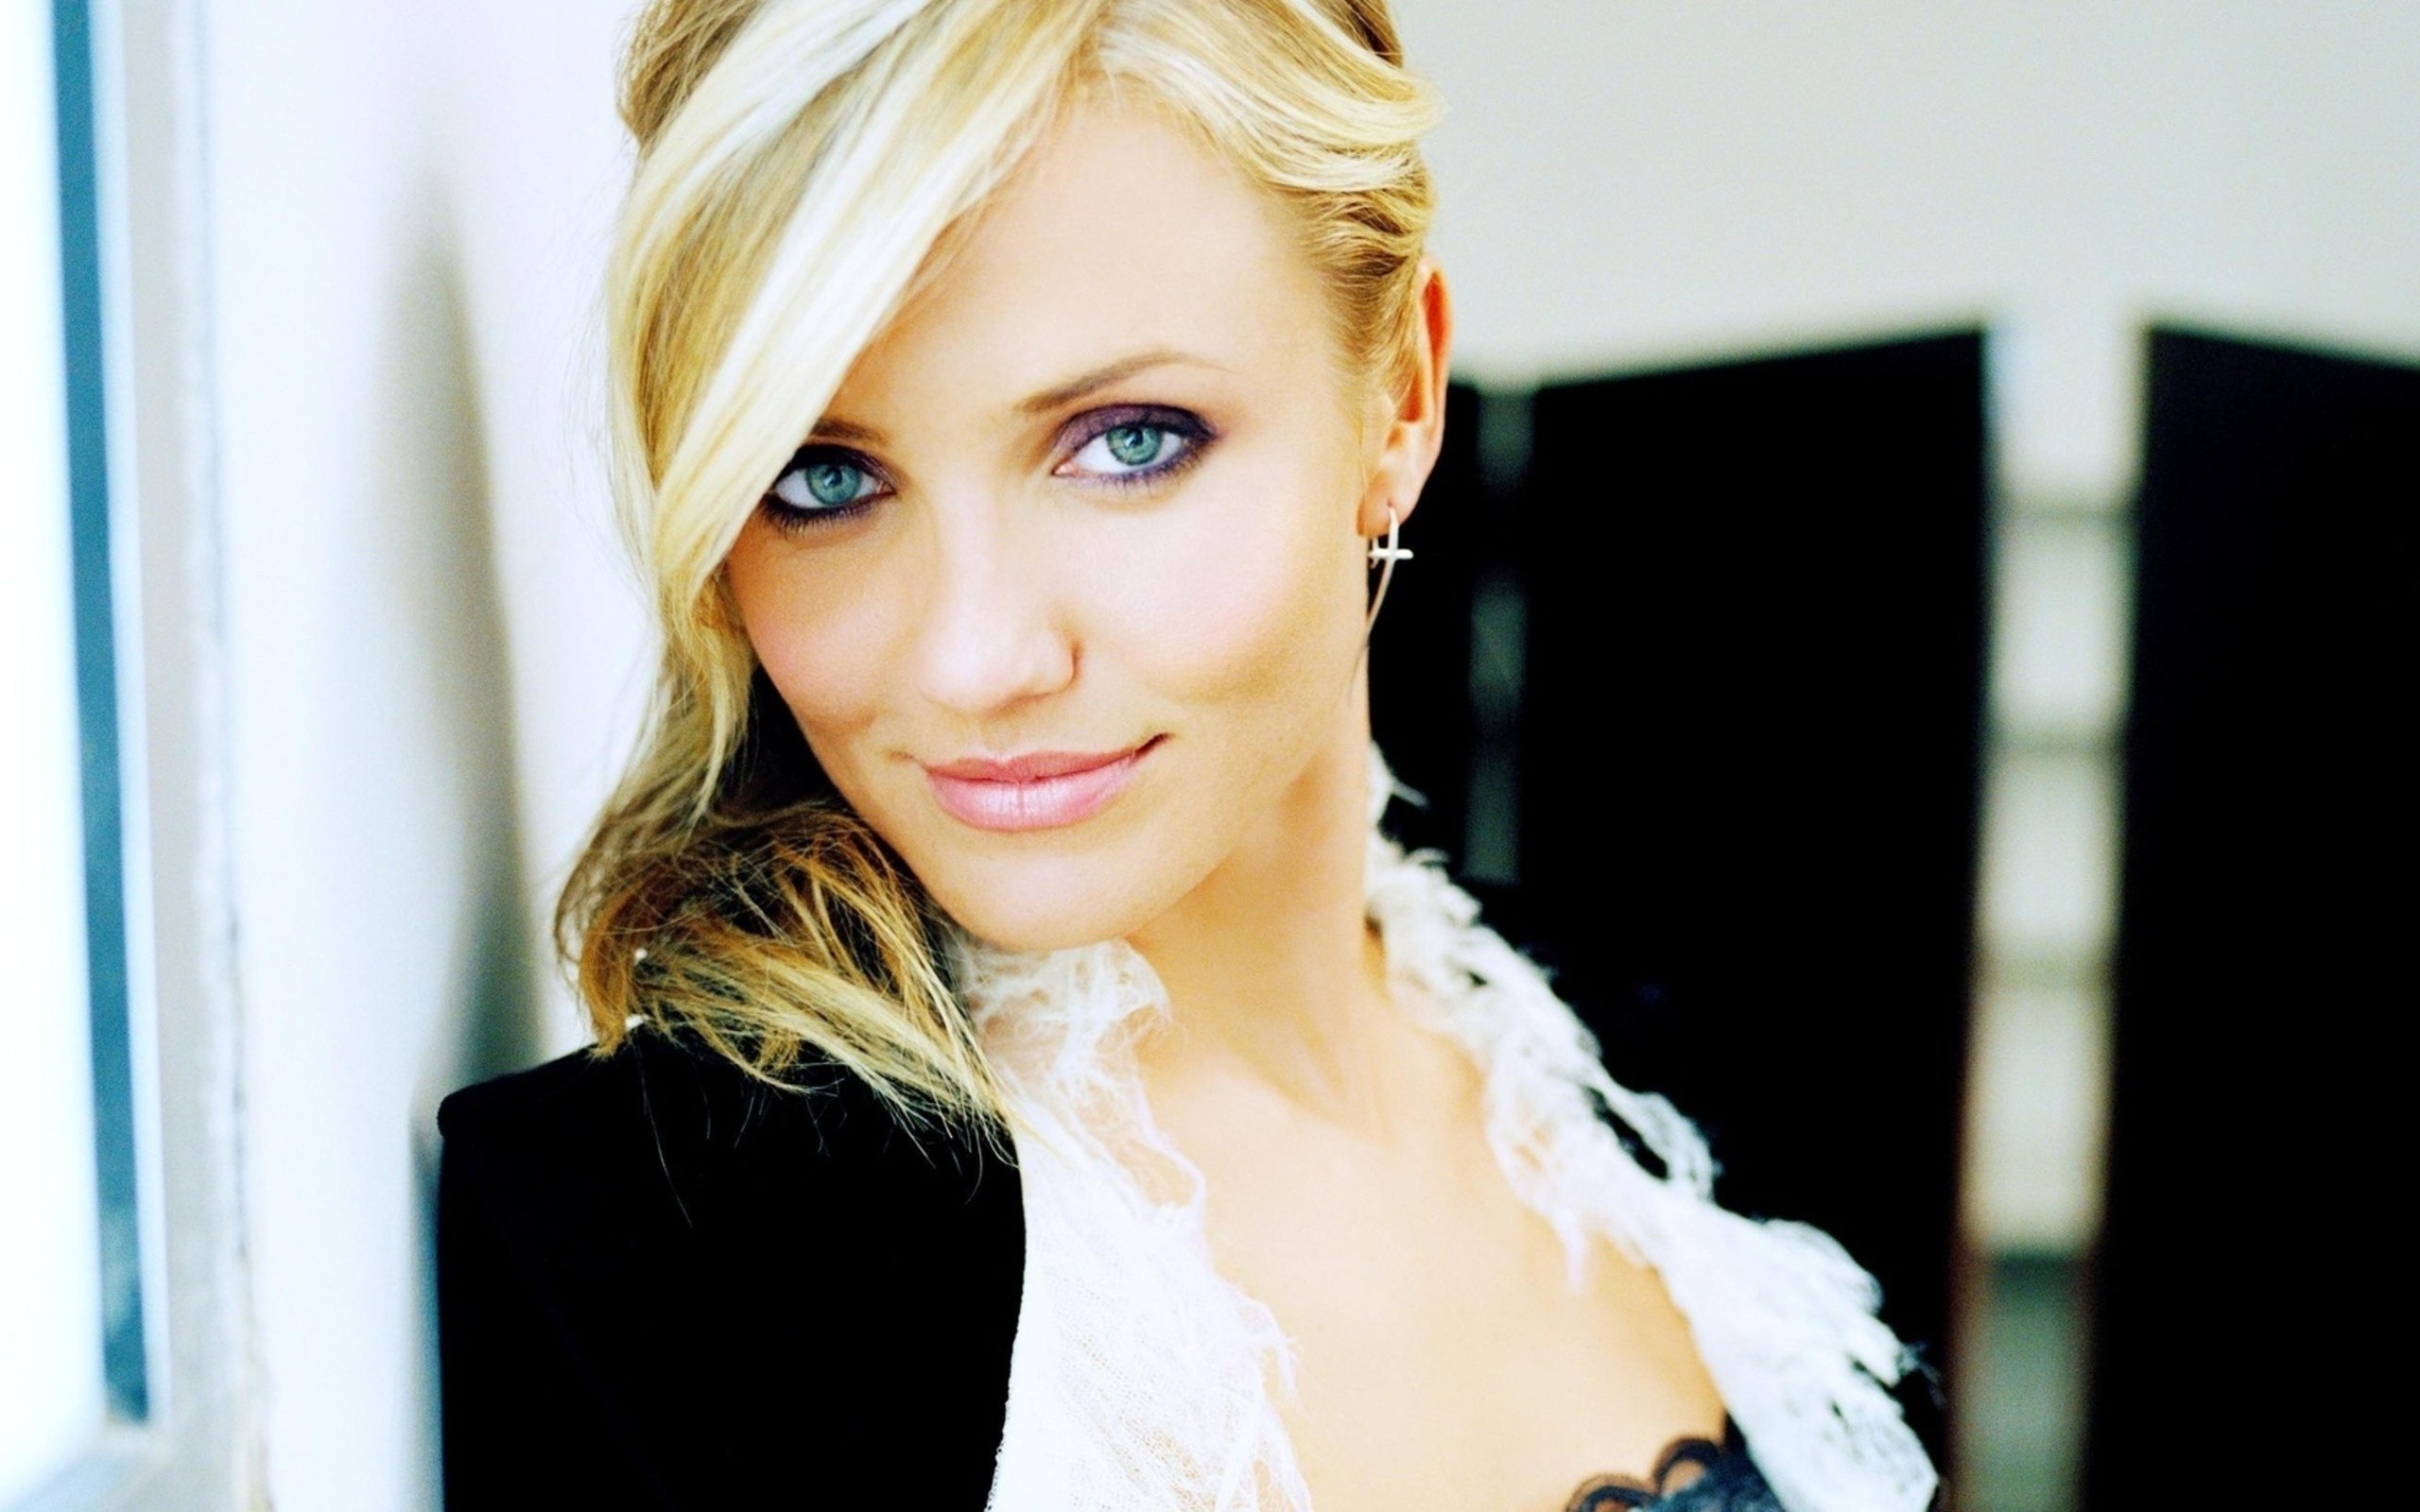 Cameron Diaz: Starred as Natalie Cook in a 2000 action comedy film, Charlie's Angels. 2560x1600 HD Background.